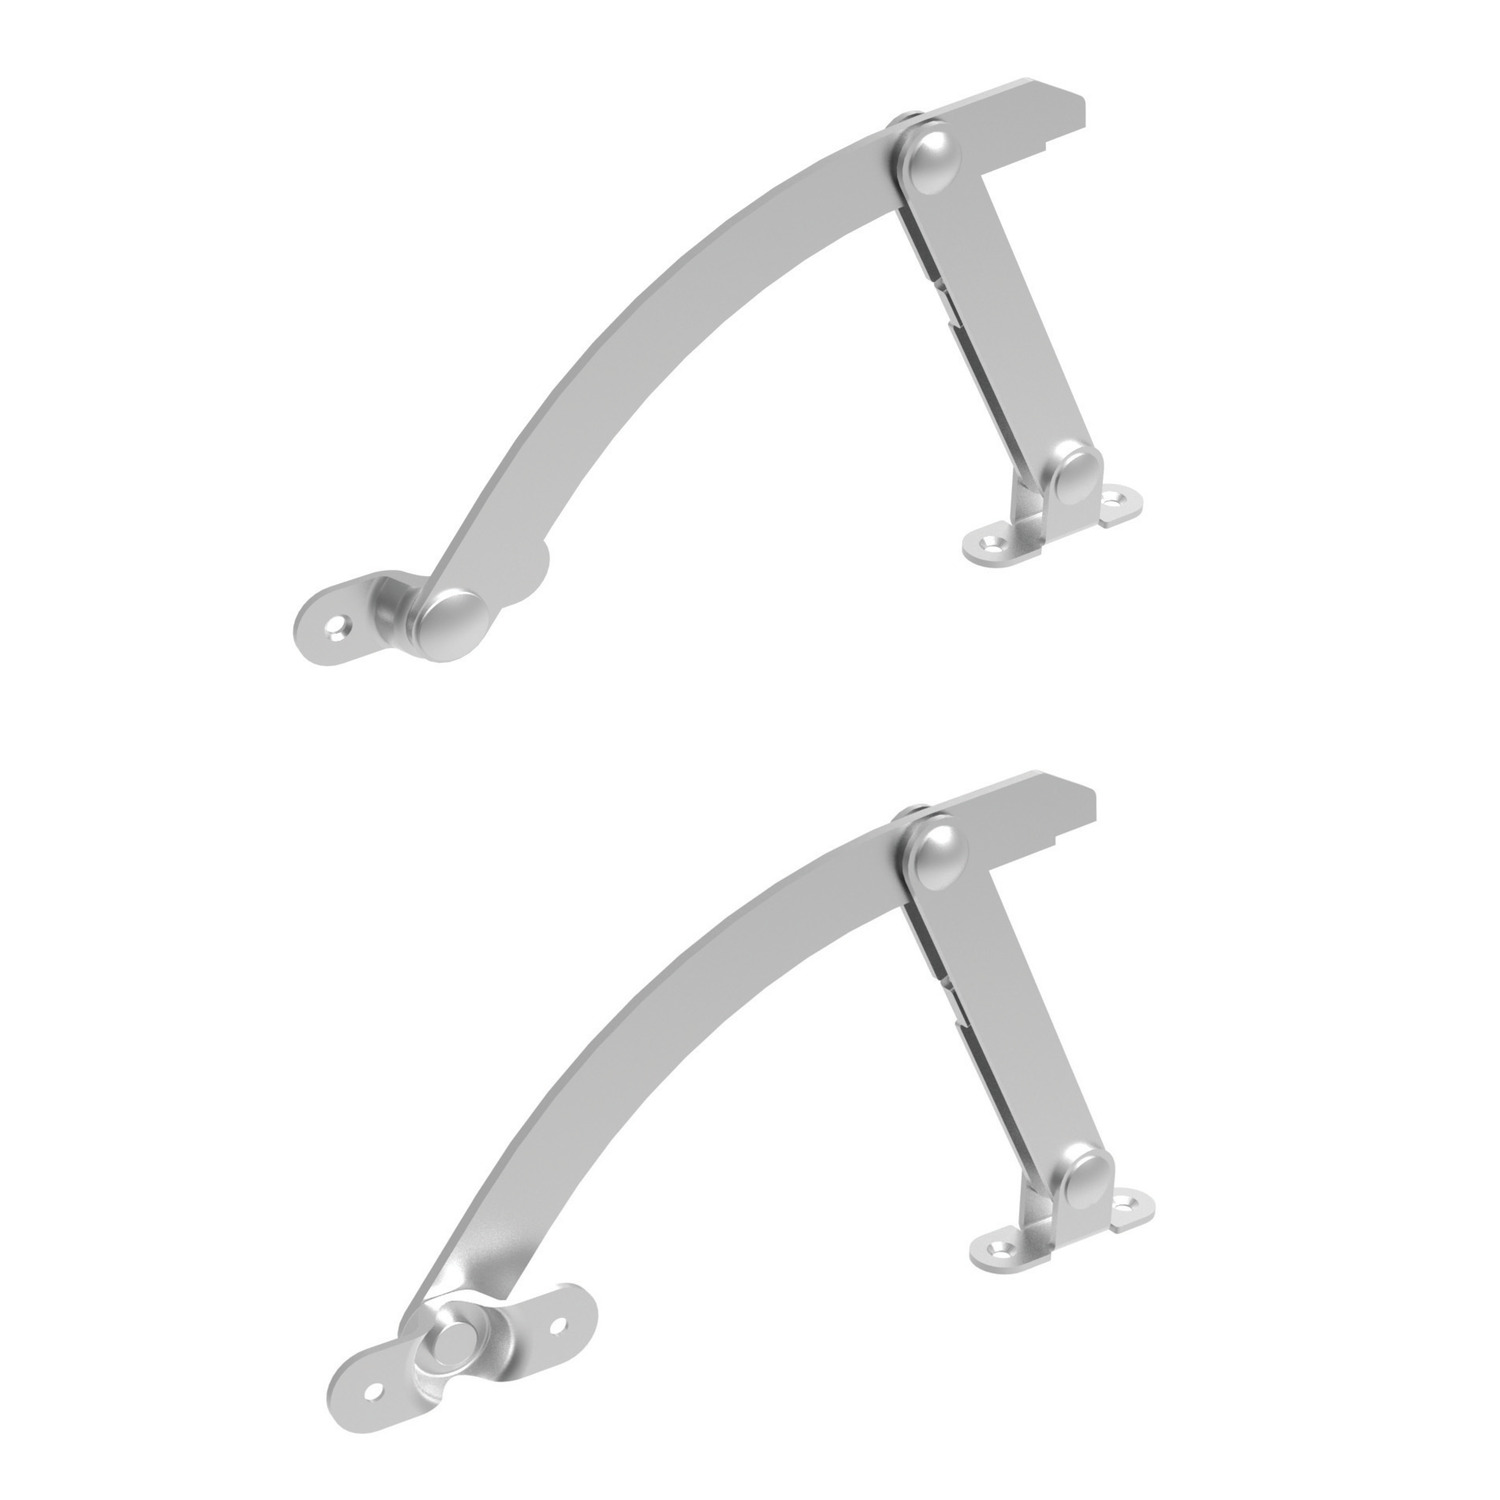 Door Stays Select left or right handed - please refer to table. Ideal for screw or weld-on mounting.